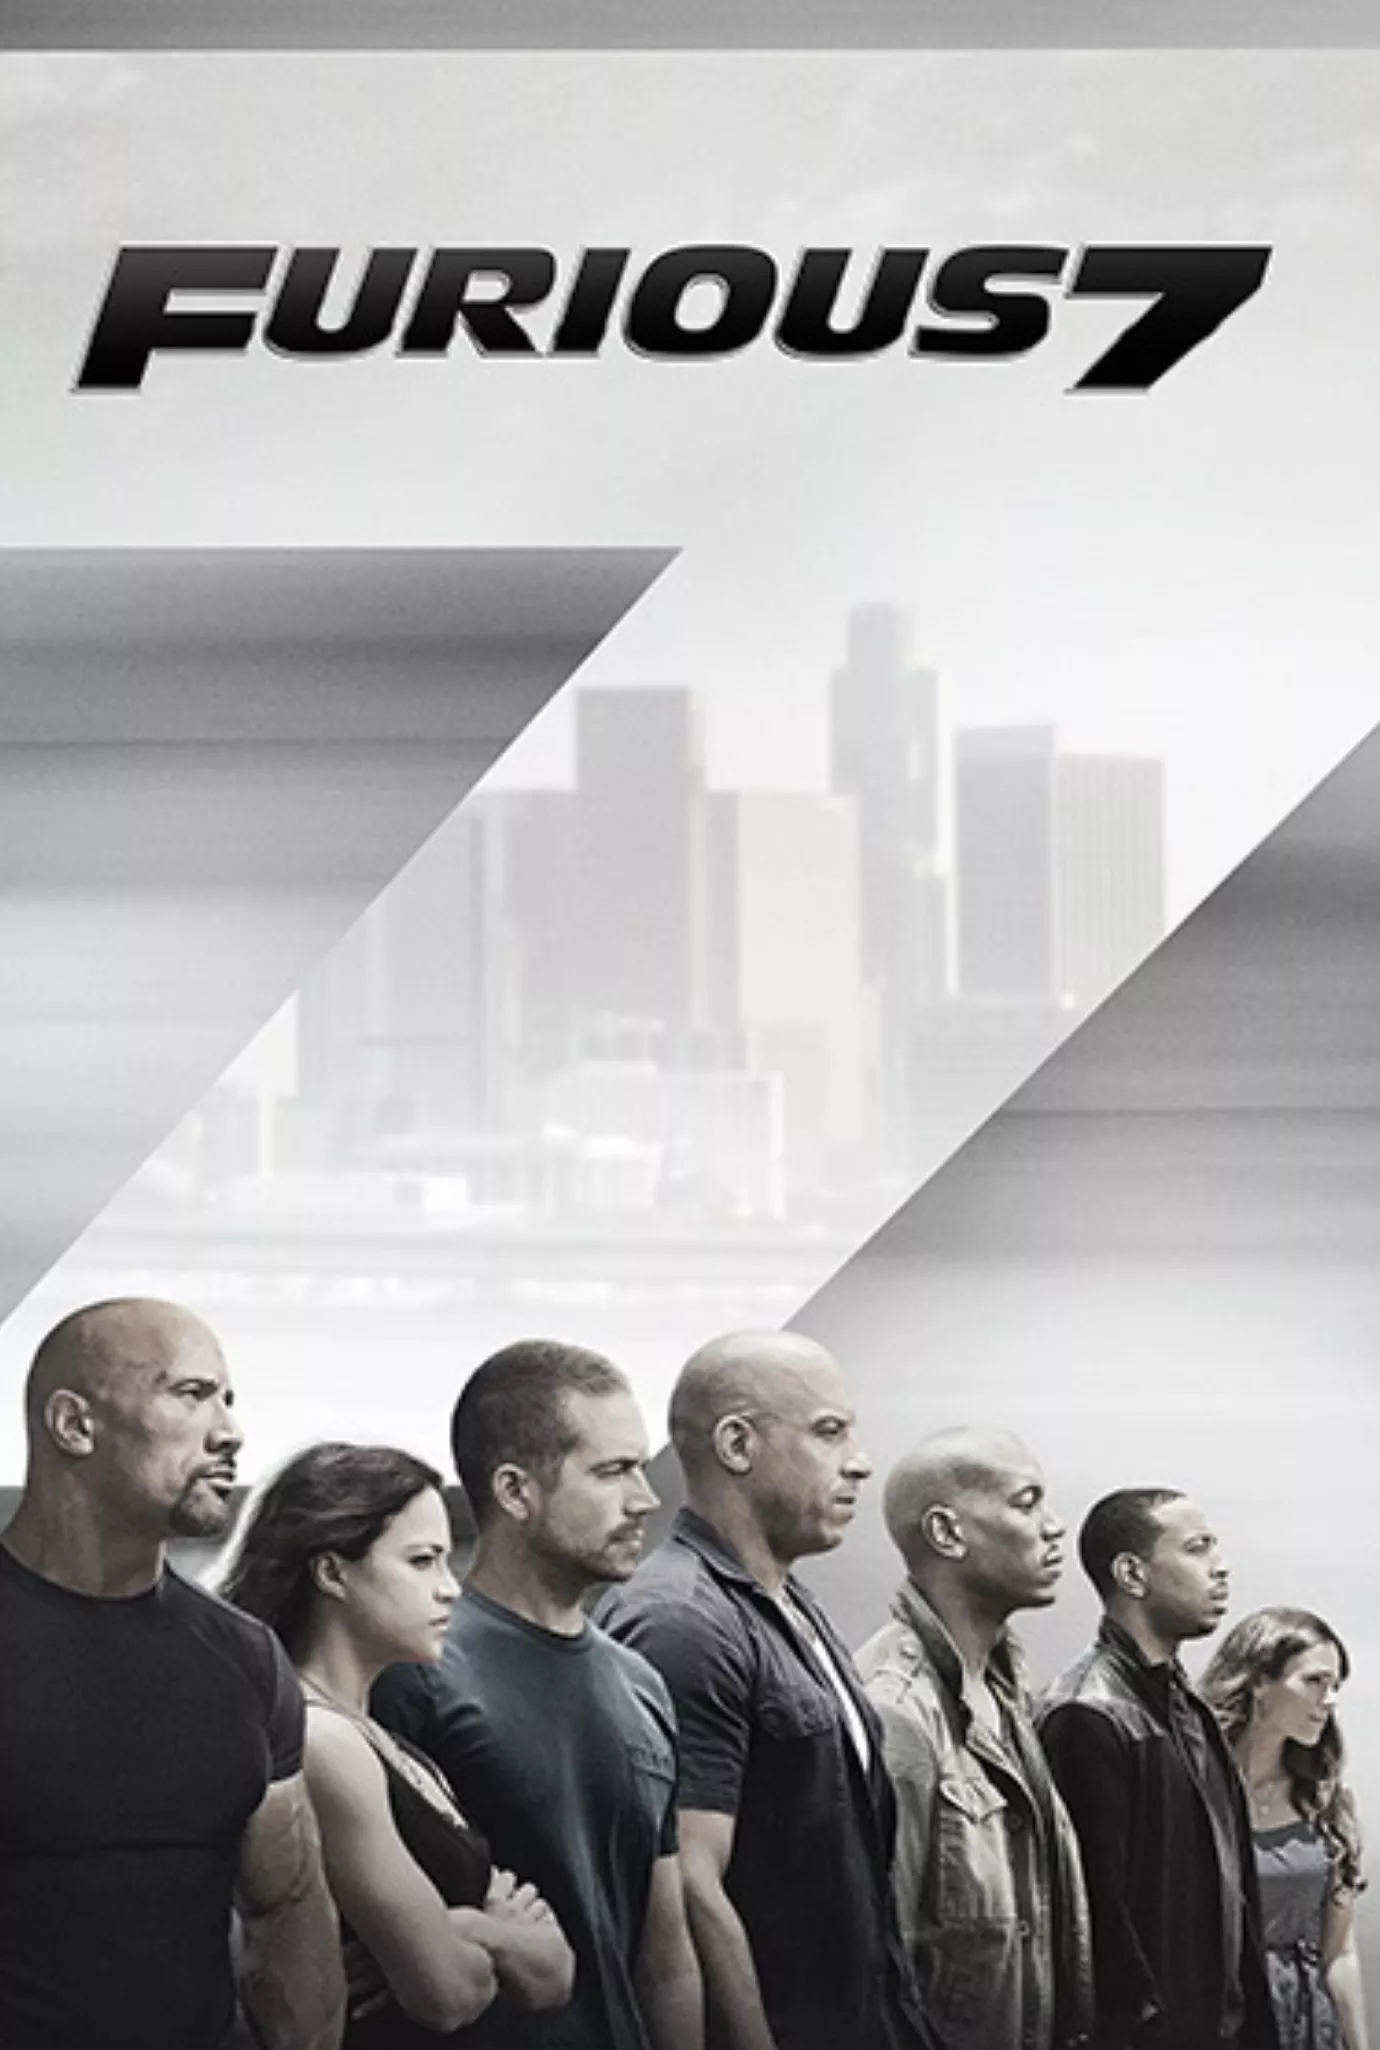 Furious 7 cast at bottom with text saying Furious 7